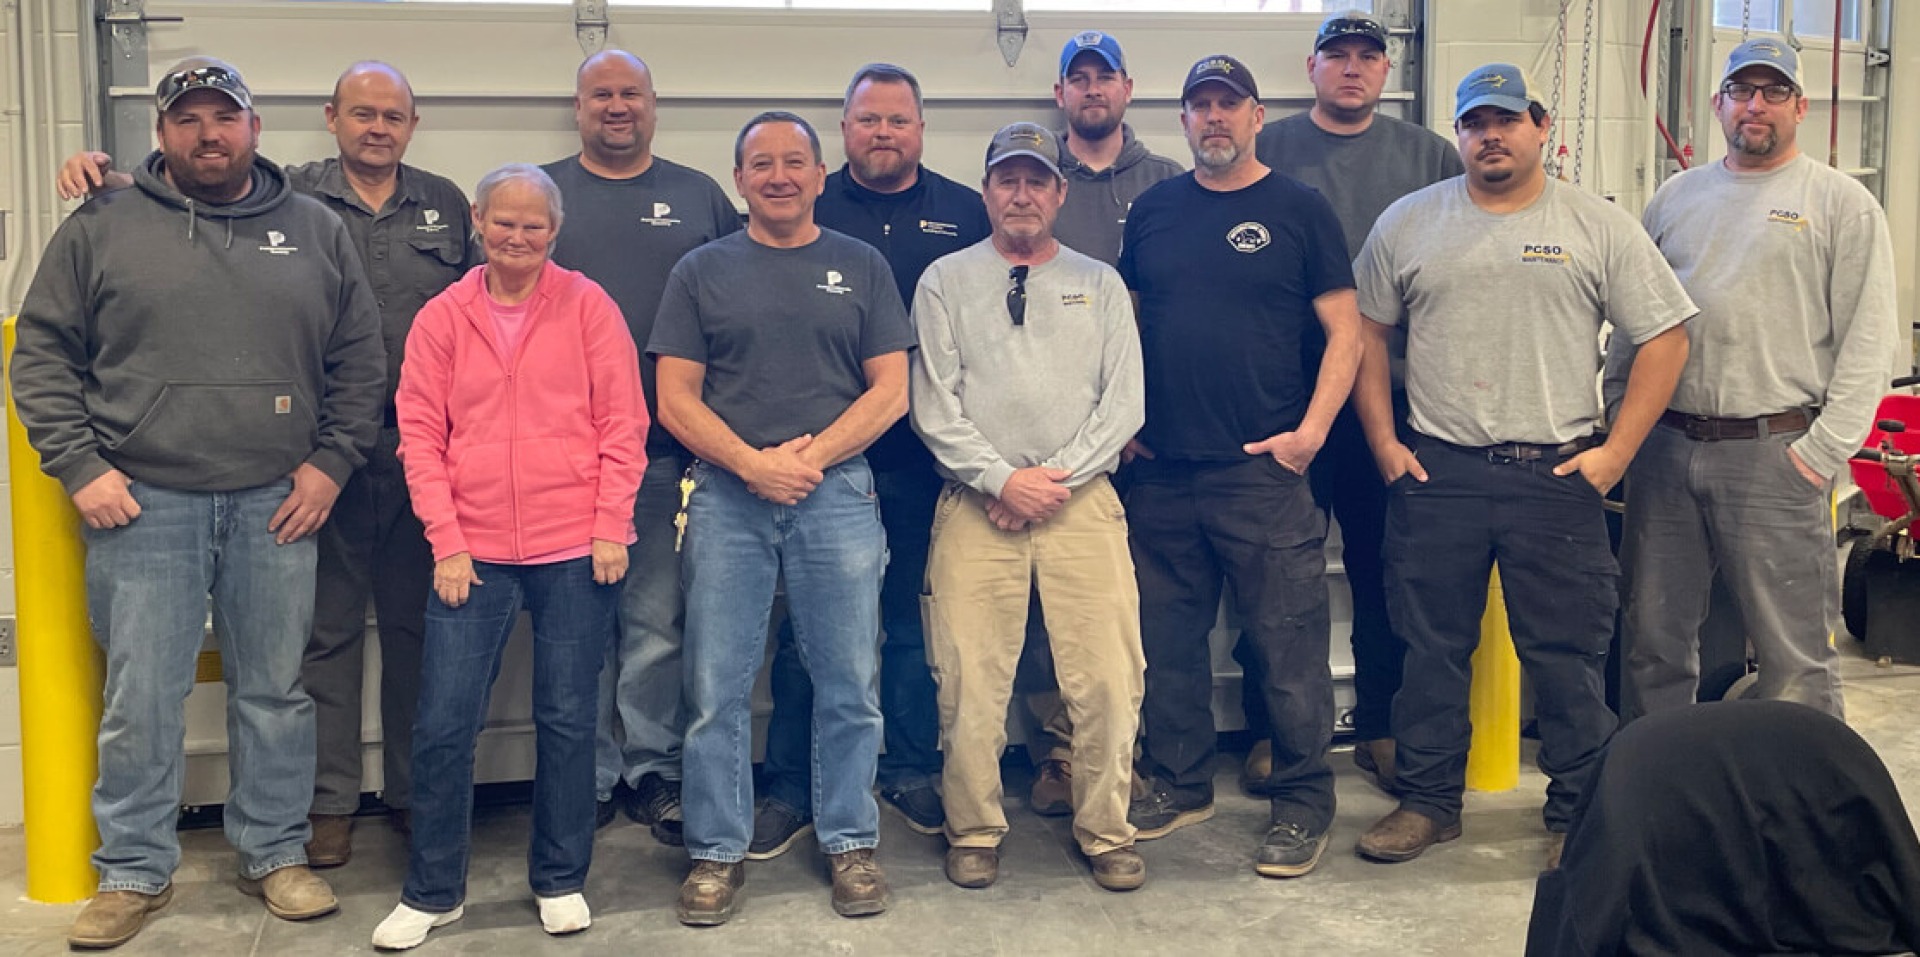 Pottawattamie County Building and Grounds staff members standing together in their work area.